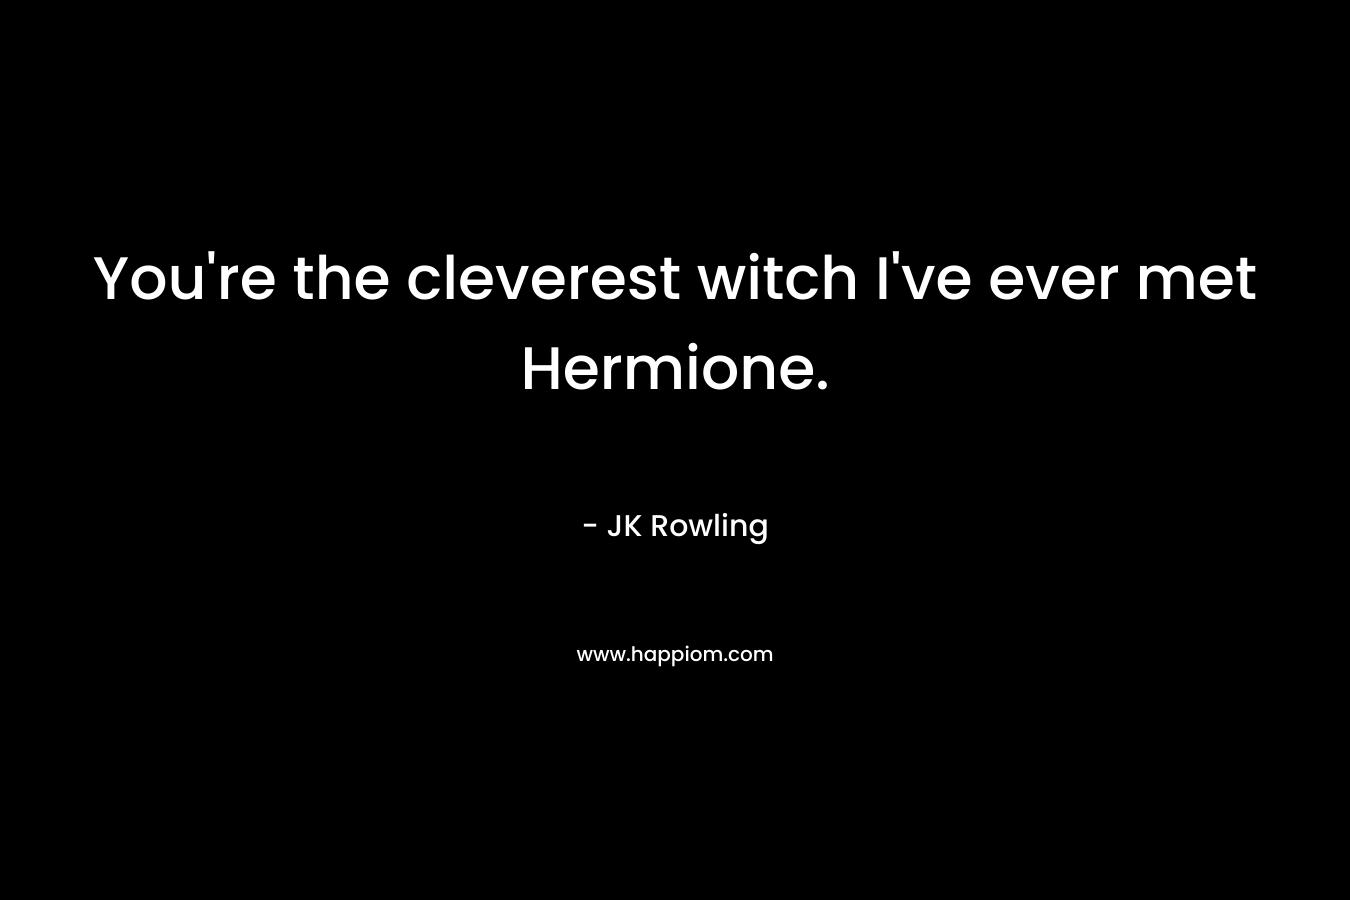 You're the cleverest witch I've ever met Hermione.